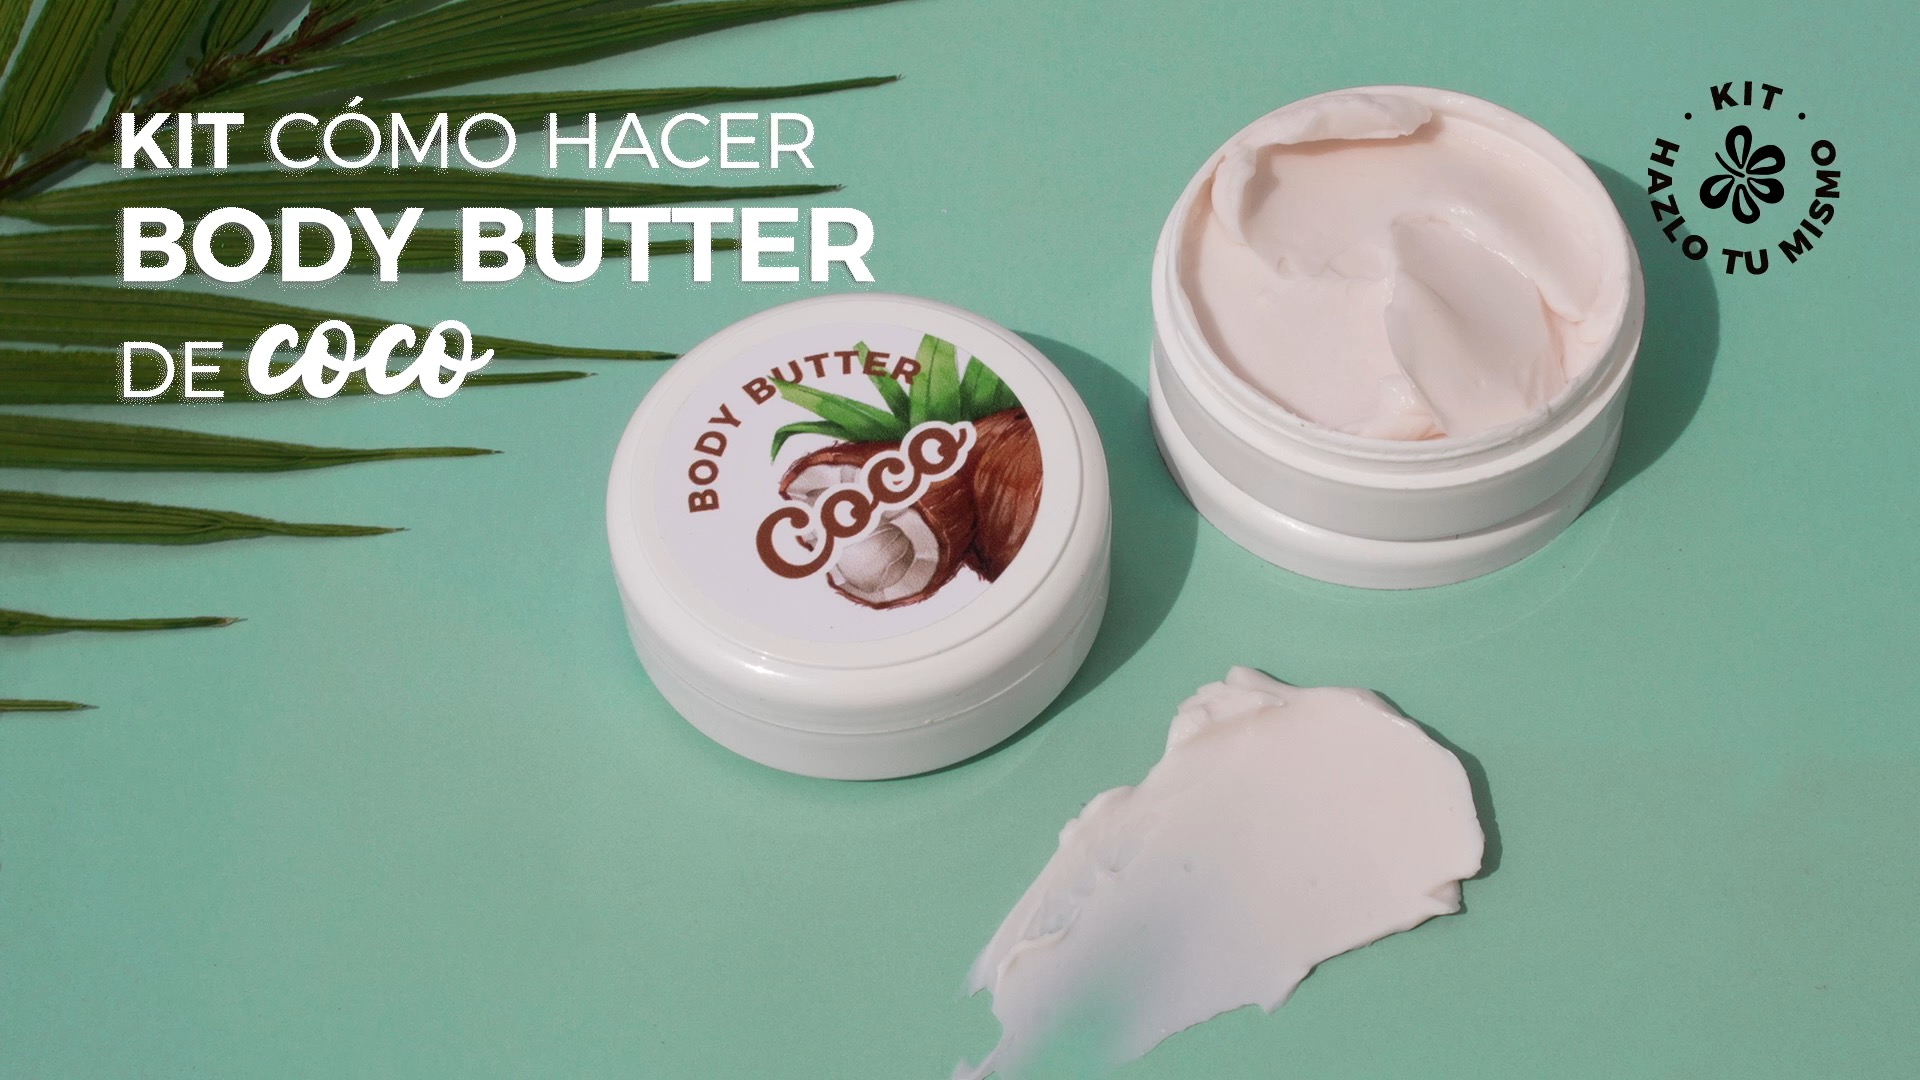 Kit cómo hacer body butter coco